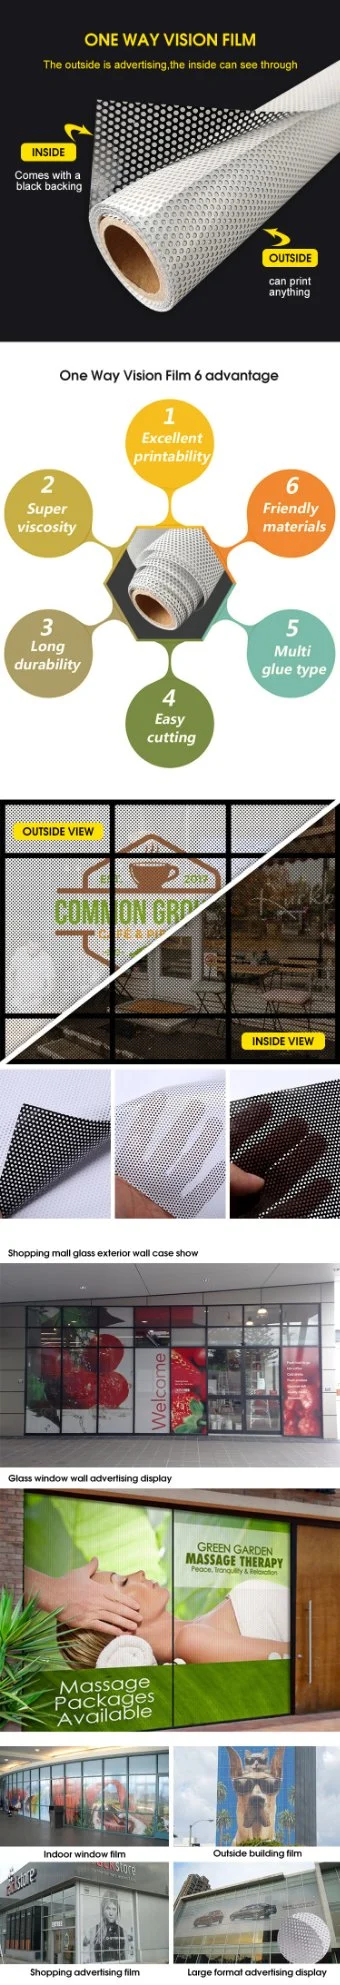 Perforated Window Film One Way Vision Film Solvent/Eco-Solvent Printing